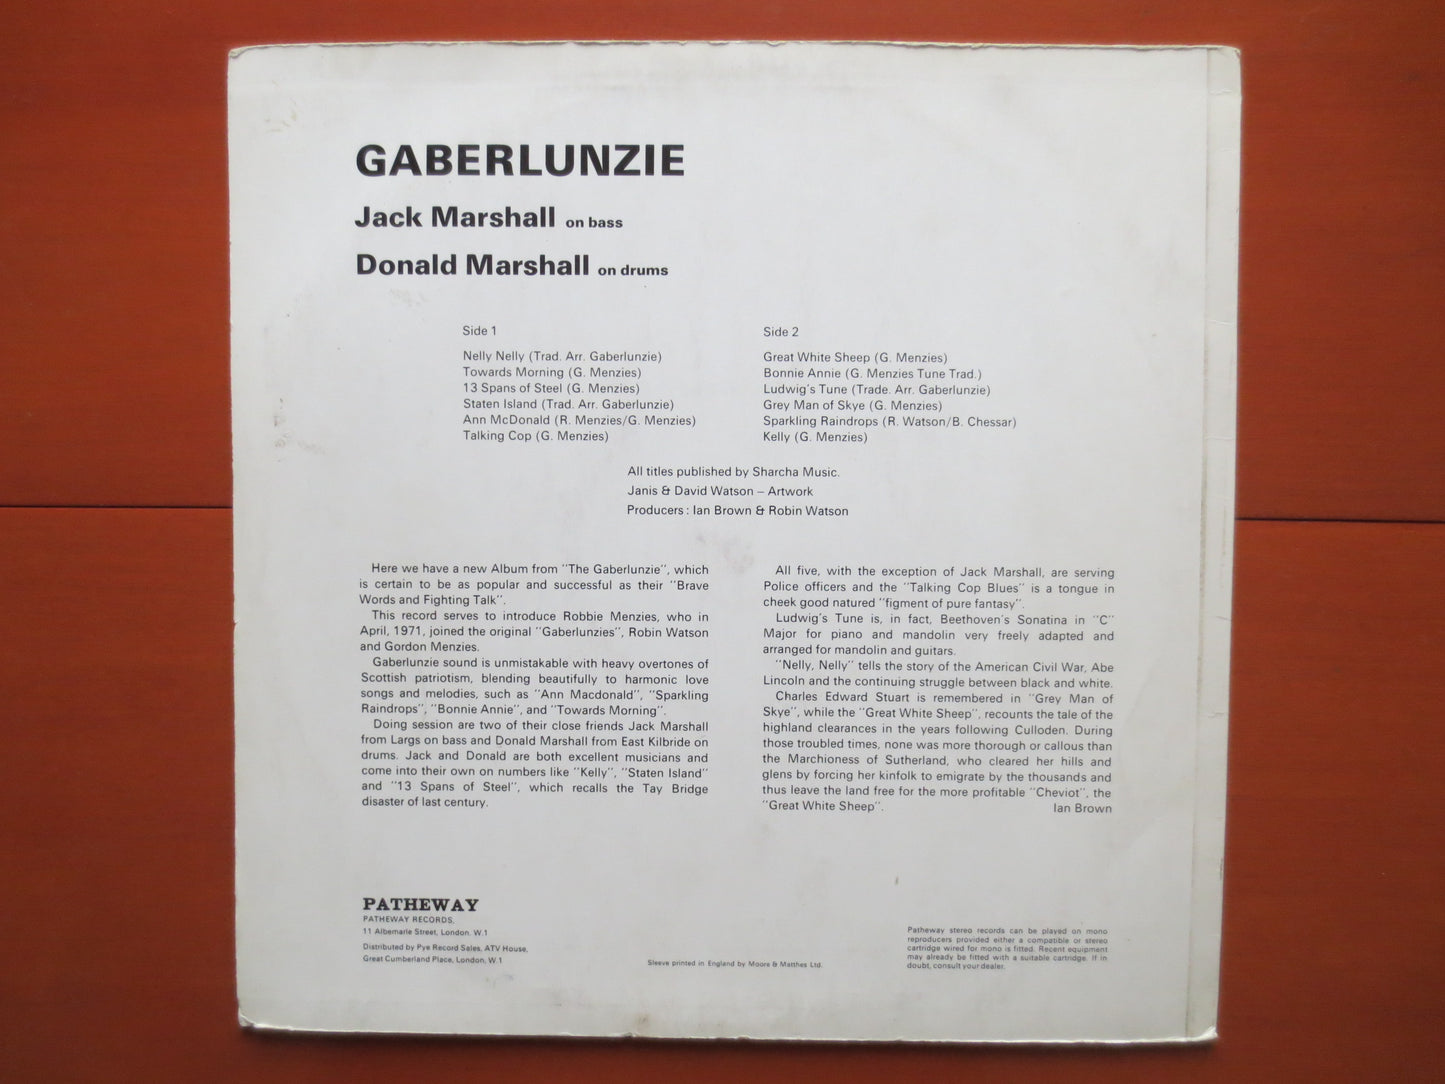 GABERLUNZIE, GABERLUNZIE Record, GABERLUNZIE Album, GABERLUNZIE Lp, Gaberlunzie Vinyl, Scottish Music, Scottish Songs, Lps, 1971 Records